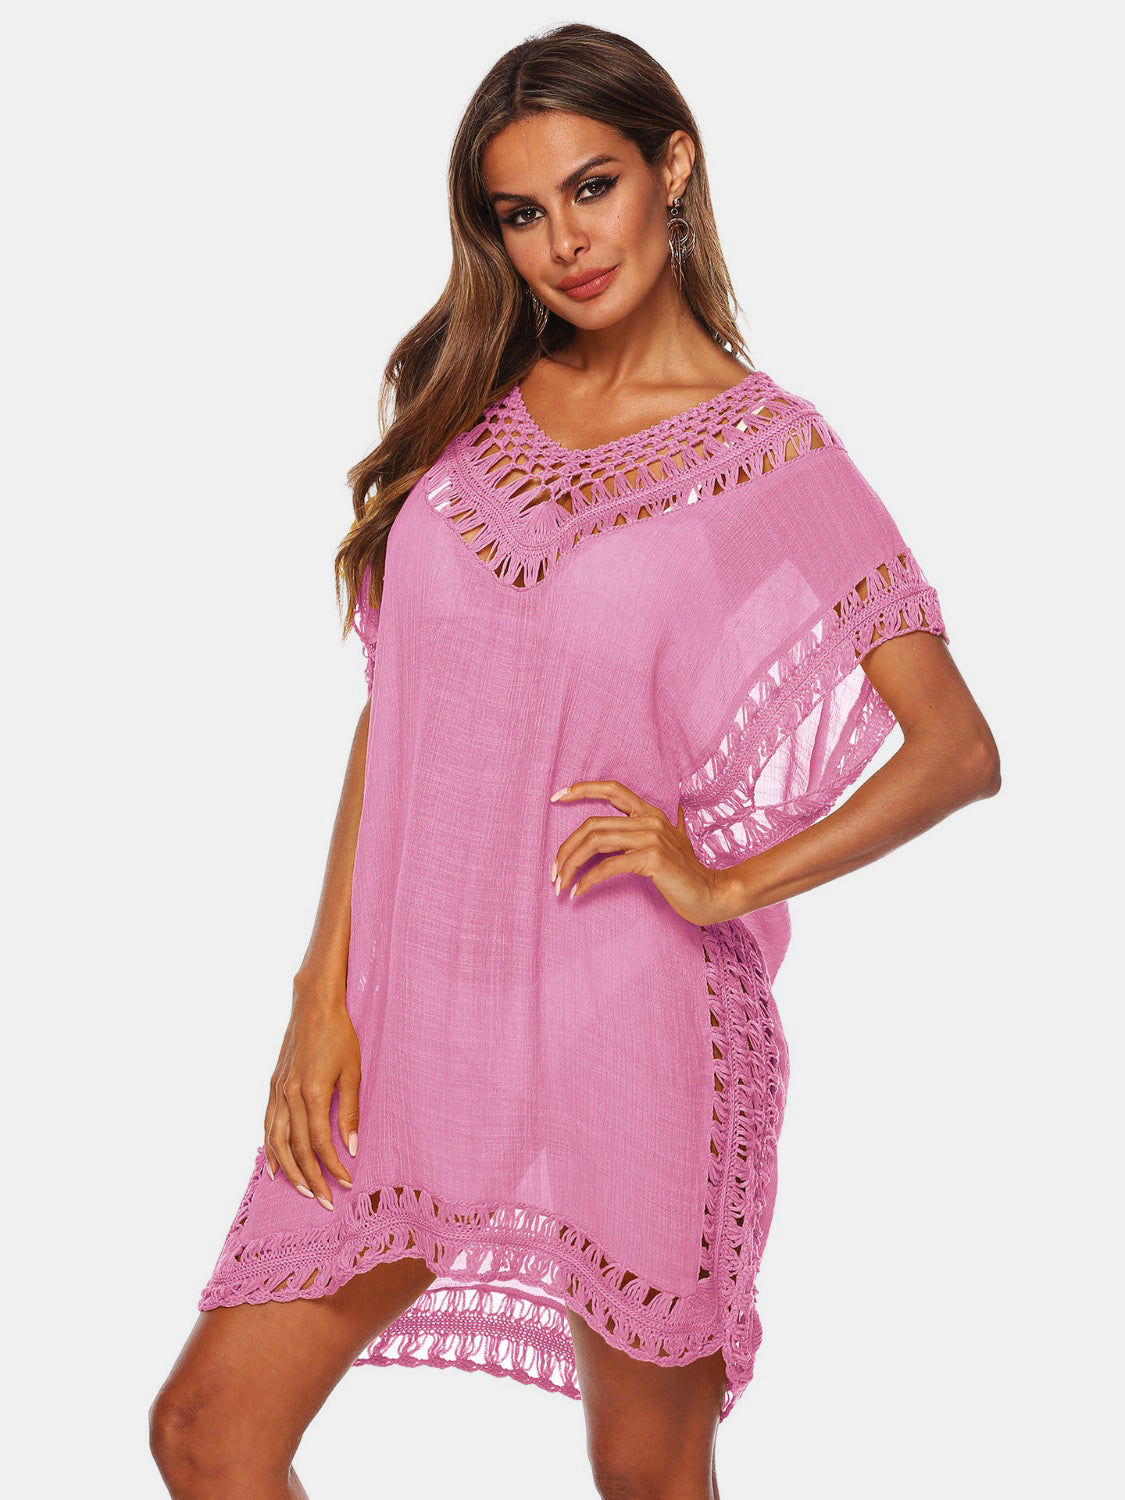 Sunset Vacation  Cutout V-Neck Short Sleeve Cover-Up  Sunset and Swim Carnation Pink One Size 